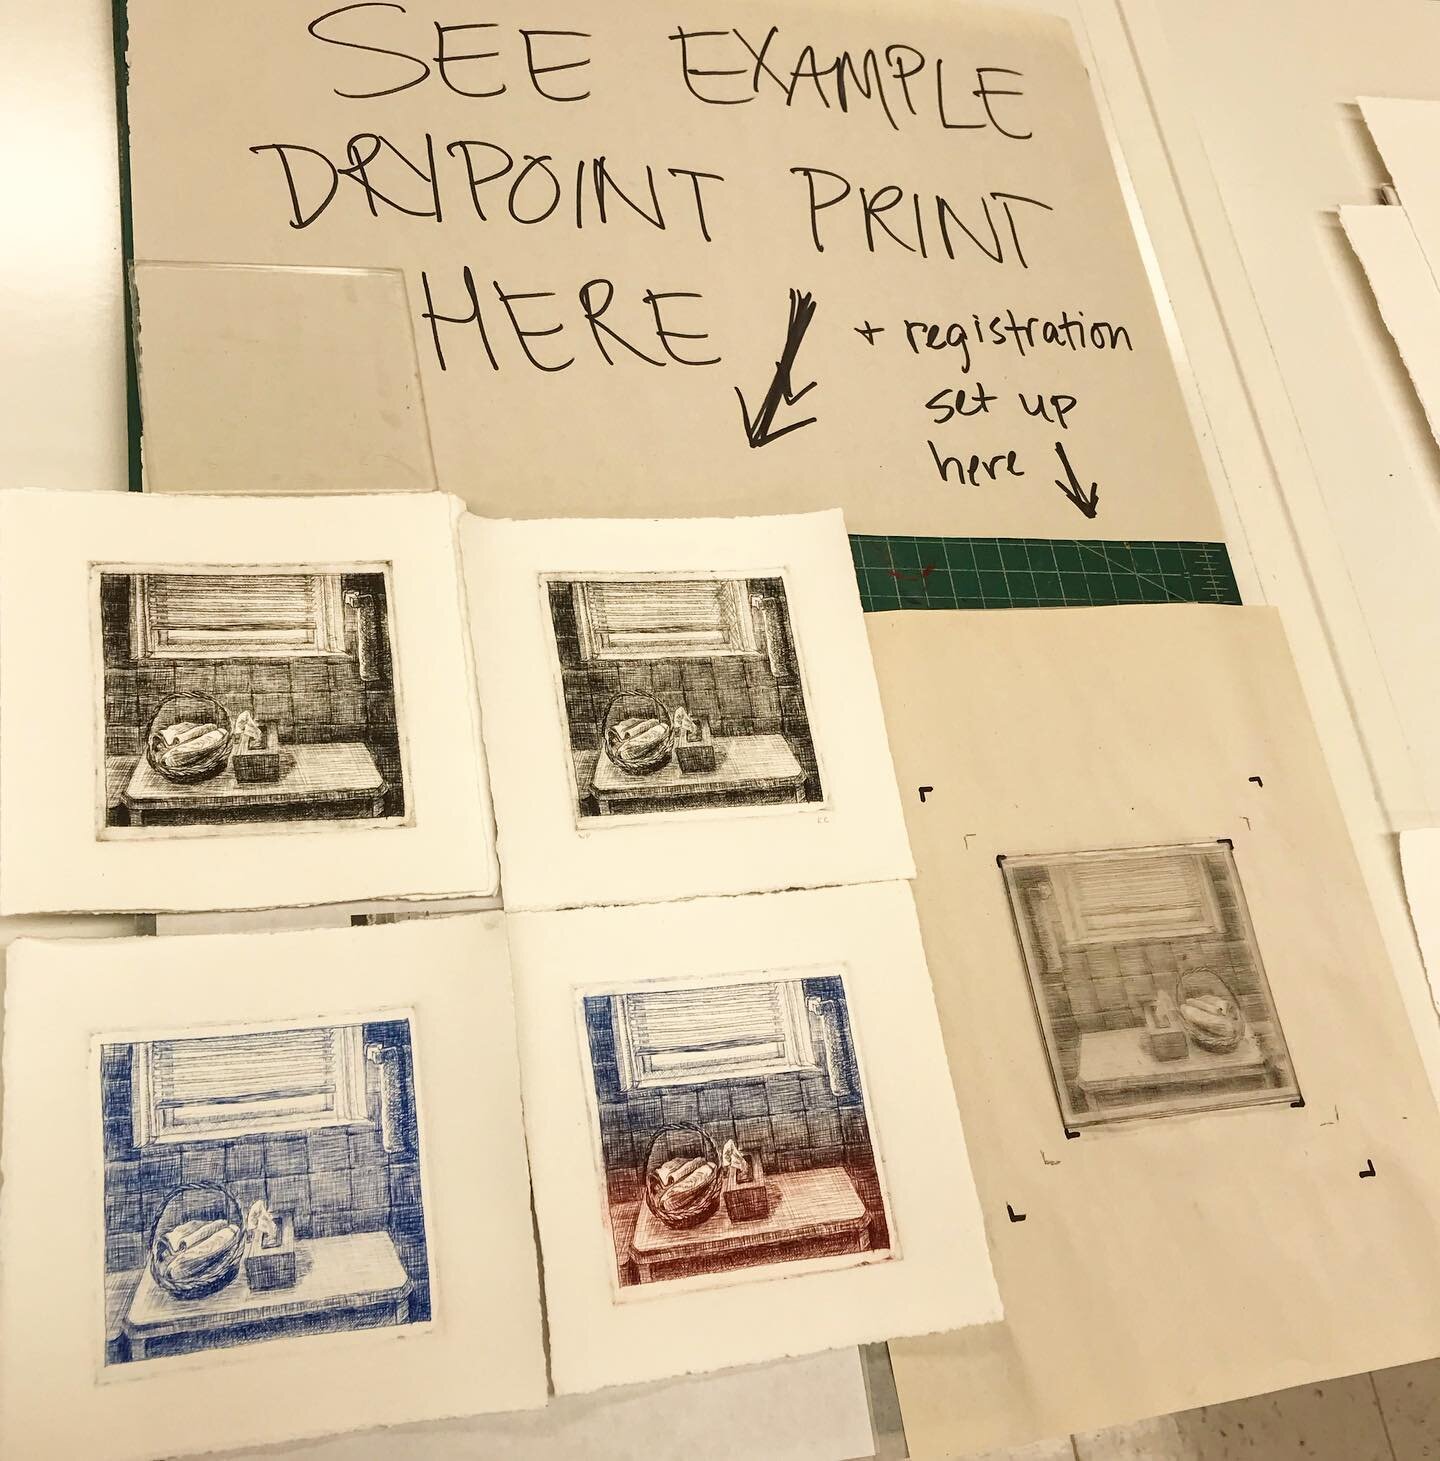 Being back in a real studio classroom (and back at my wonderful alma mater) is a huge boost to my mood, despite the double masking, constant sanitizing and the snowy roads... all worth it.  Drypoint prints from my demos this week! Stay safe and healt